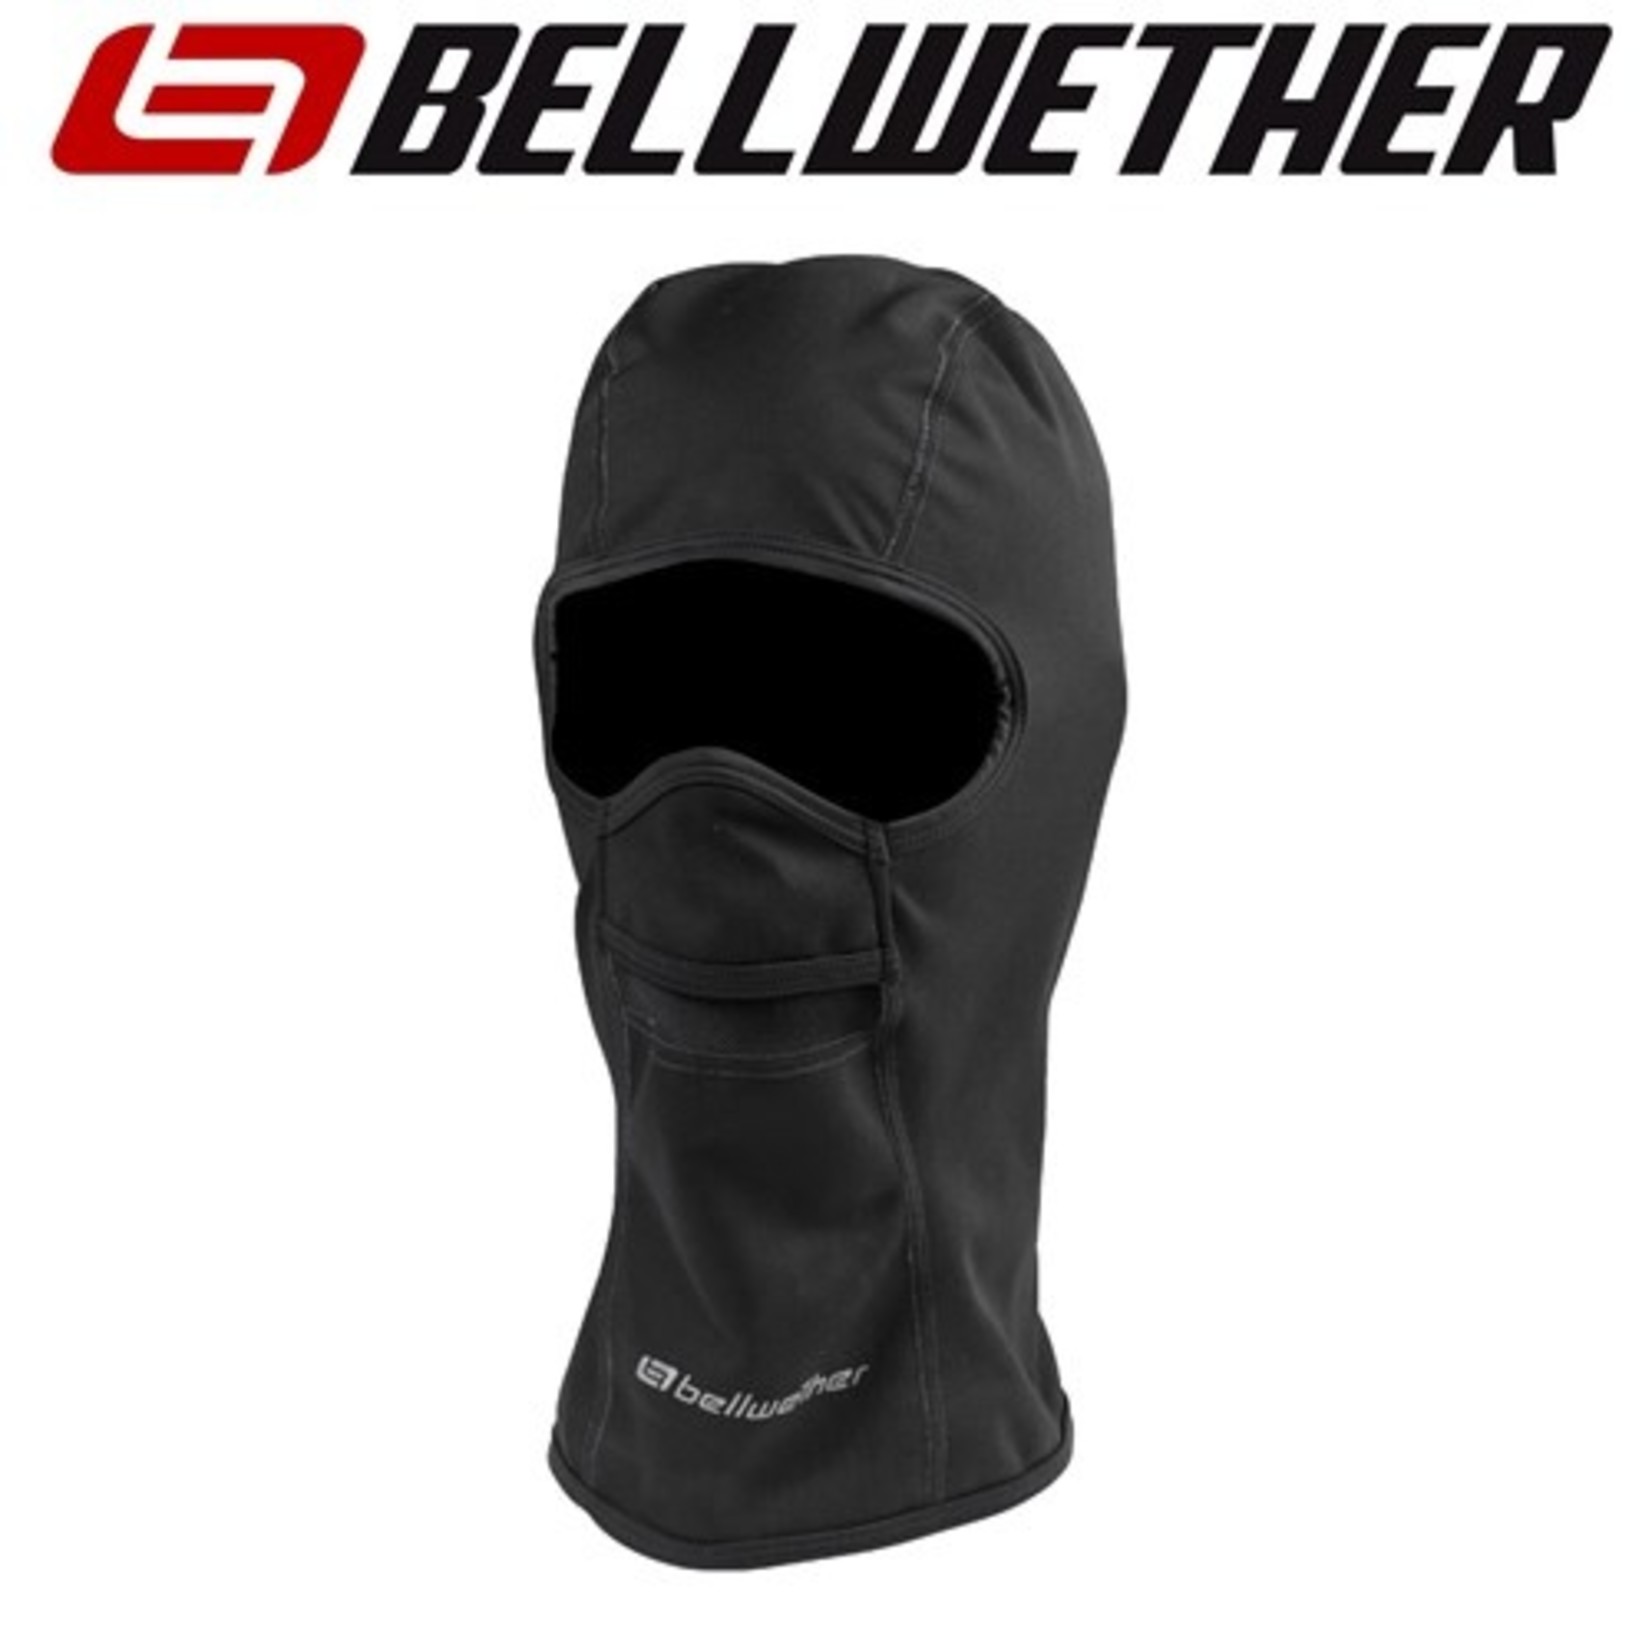 Bellwether Bellwether Bike/Cycling Coldfront Balaclava - Small-Medium